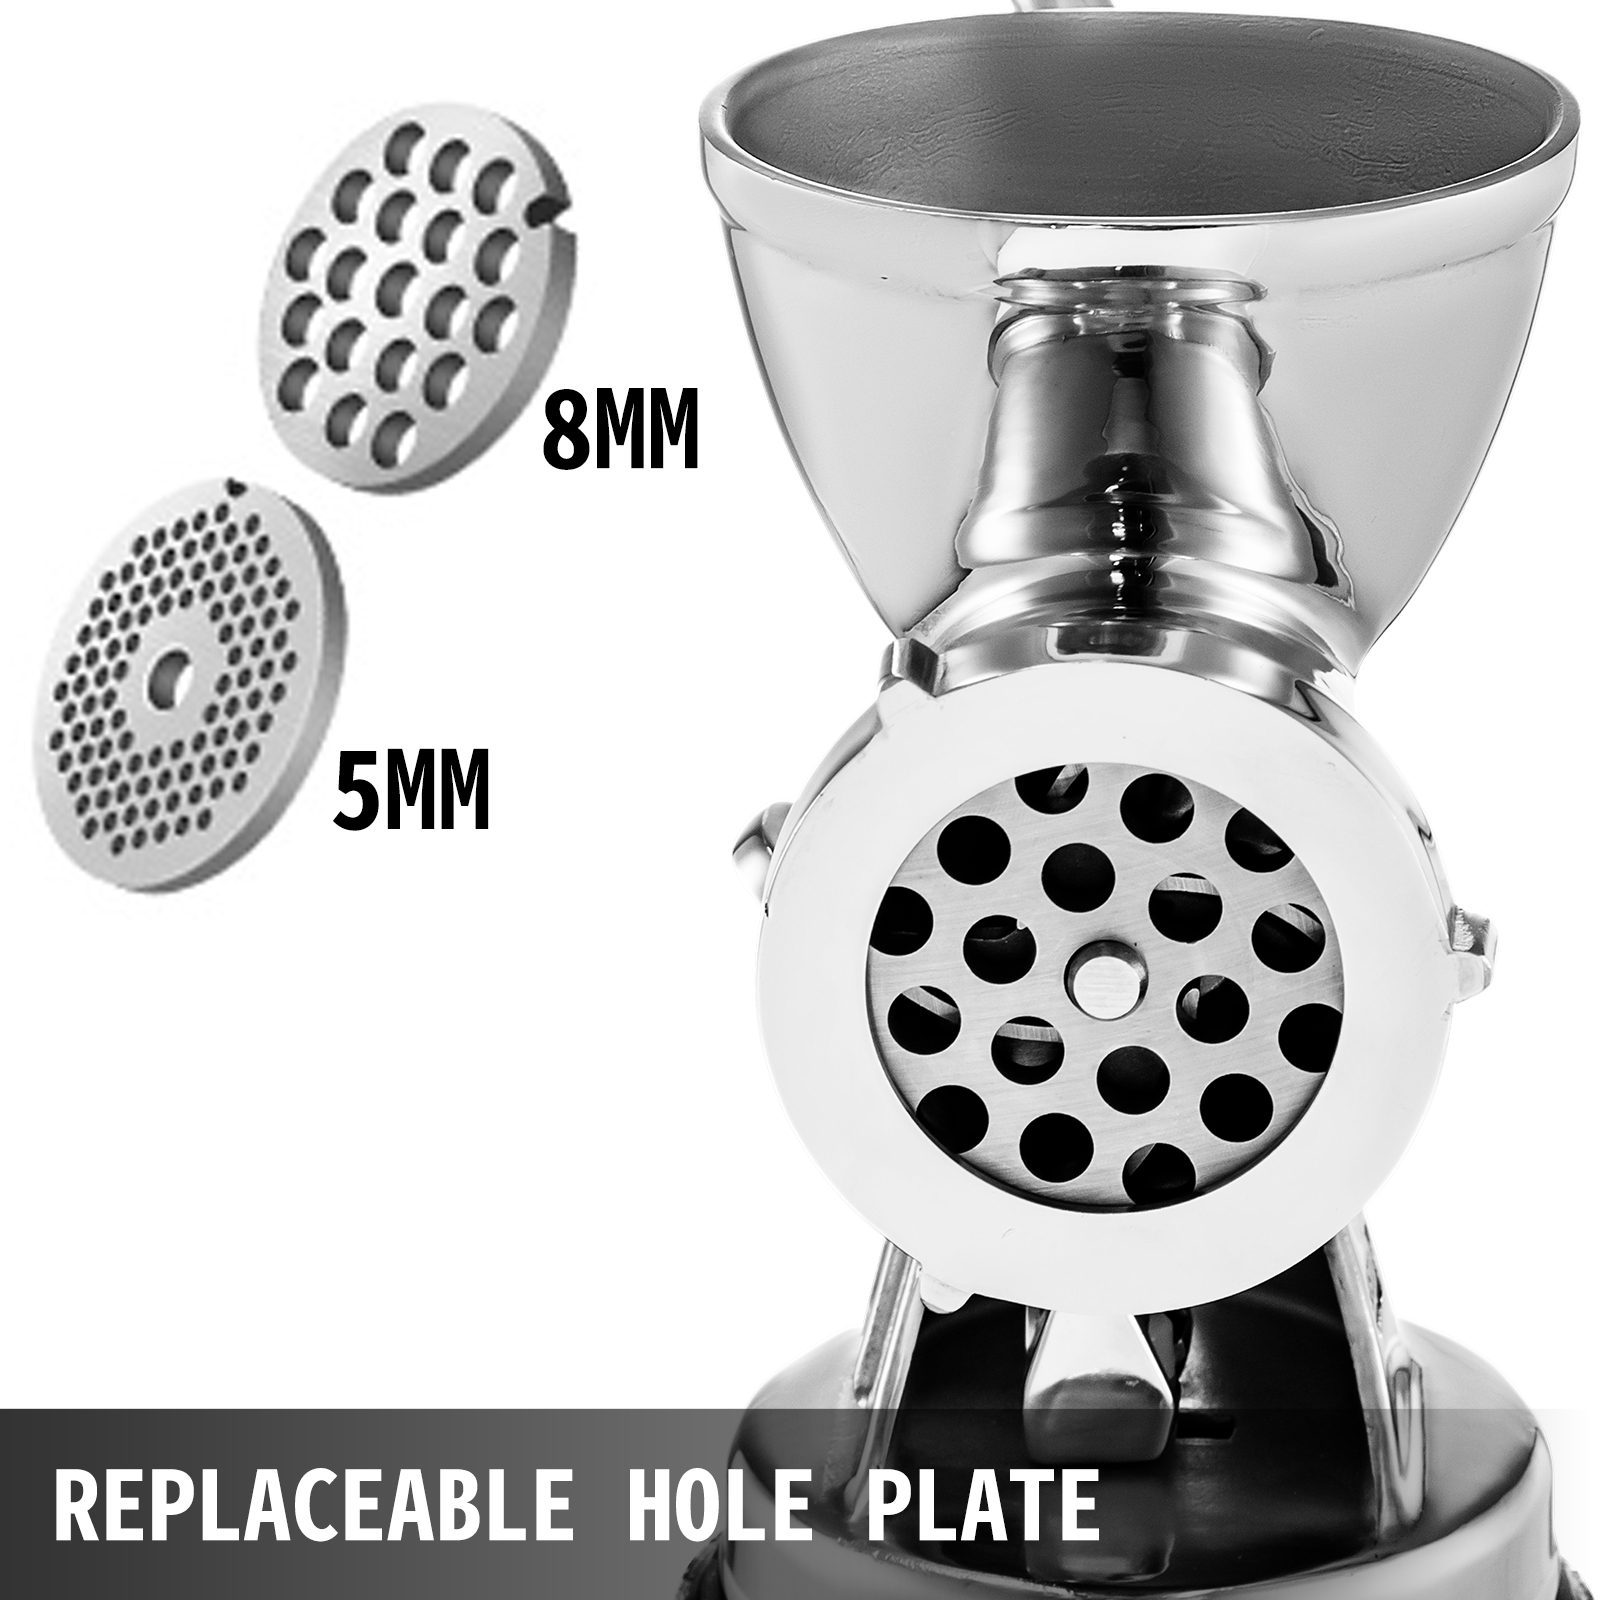 Huanyu Meat Grinder Manual Stainless Steel Meat Mincer Sausage Stuffer  Filler Handheld Meat Ginding Machine Multifunctional Attachments Household  for